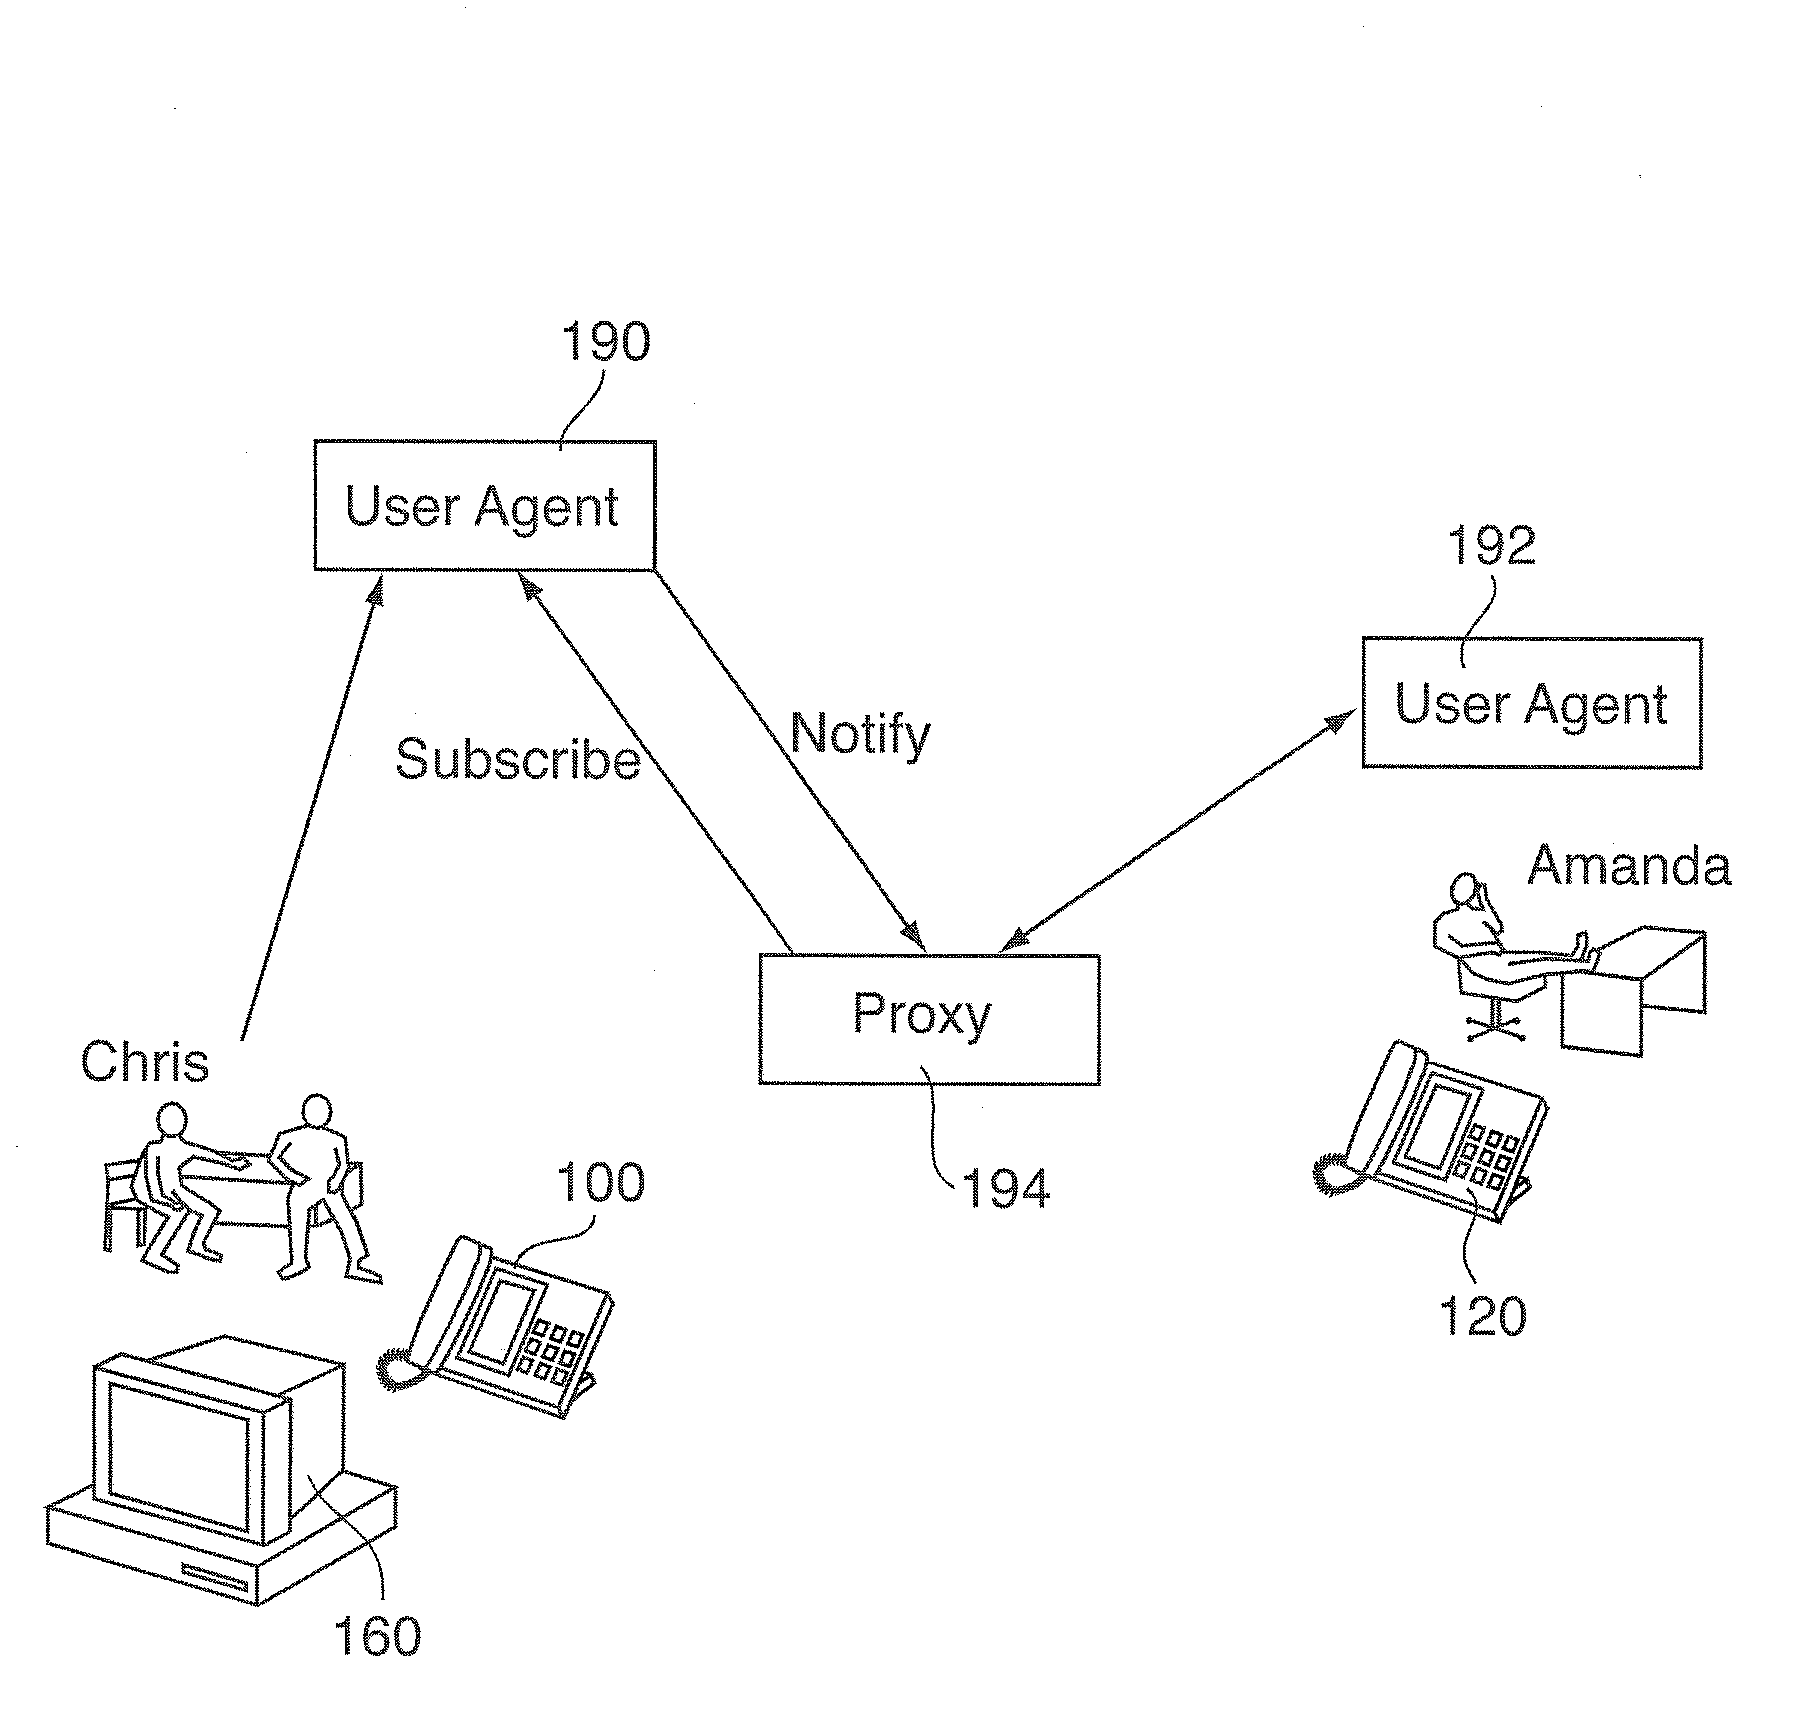 System and Method for Automatic Call Back Using Availability Information